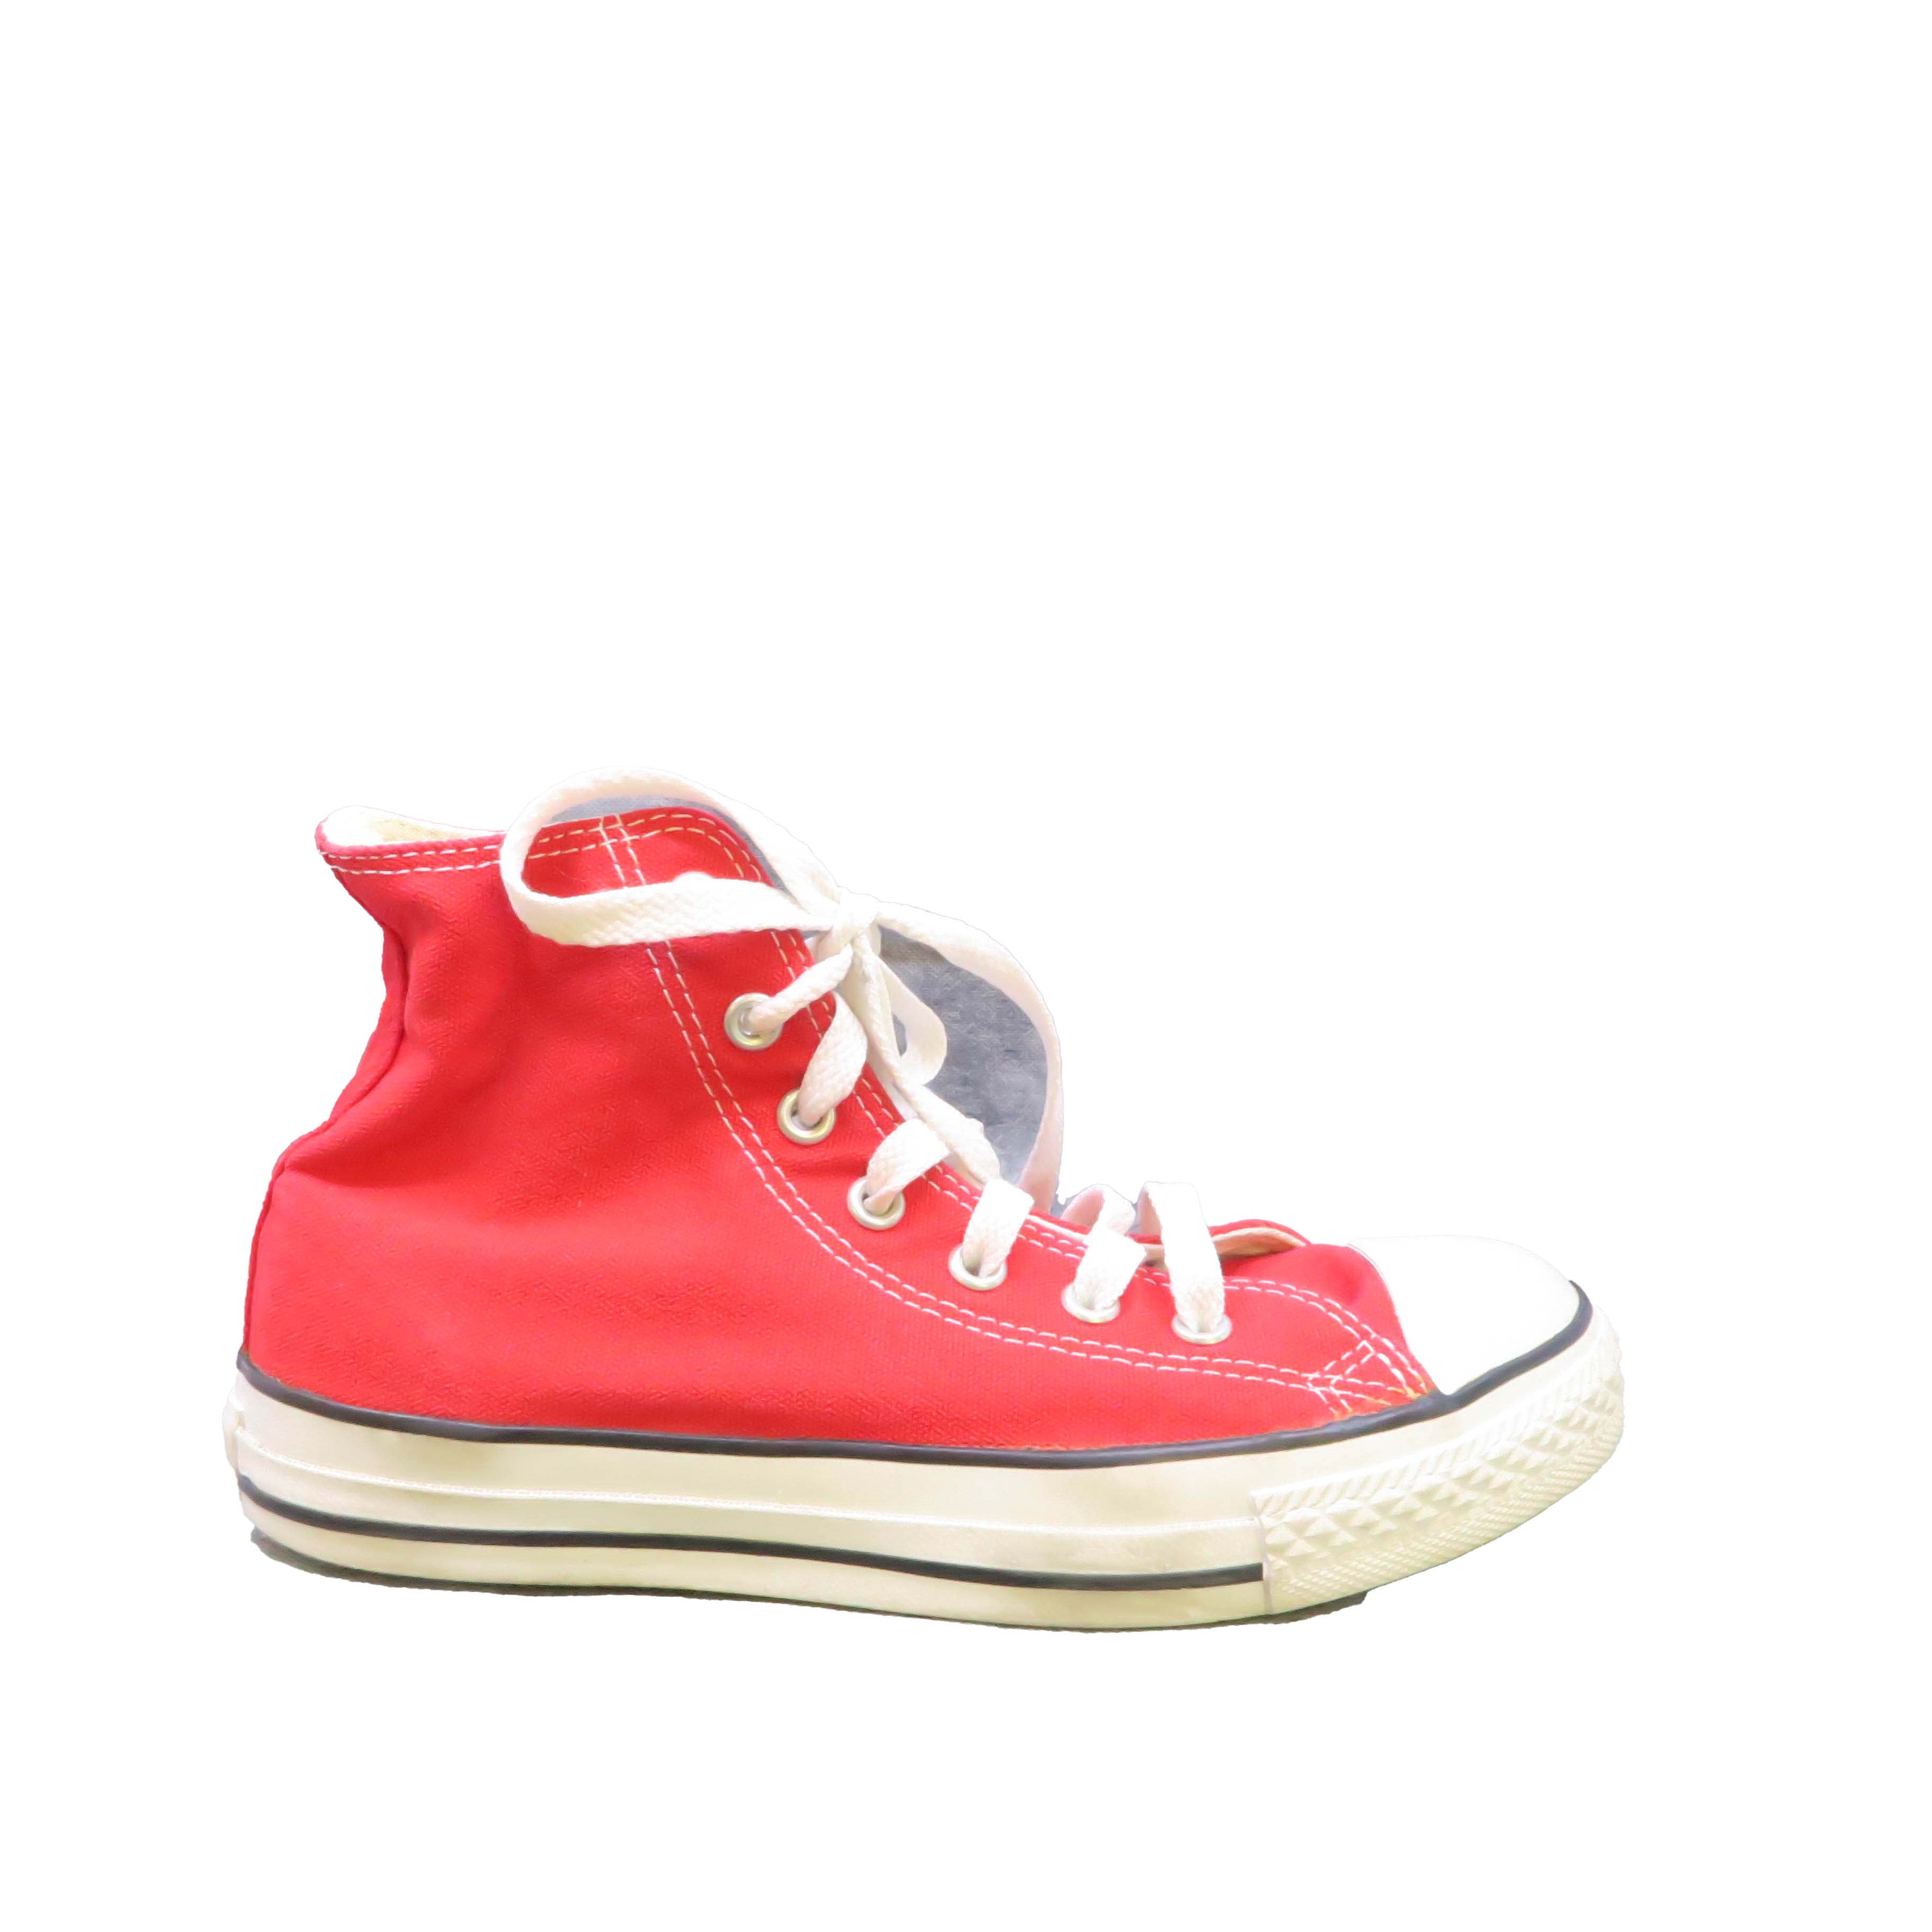 Pre-owned Converse Unisex size: 3 Youth - Walmart.com